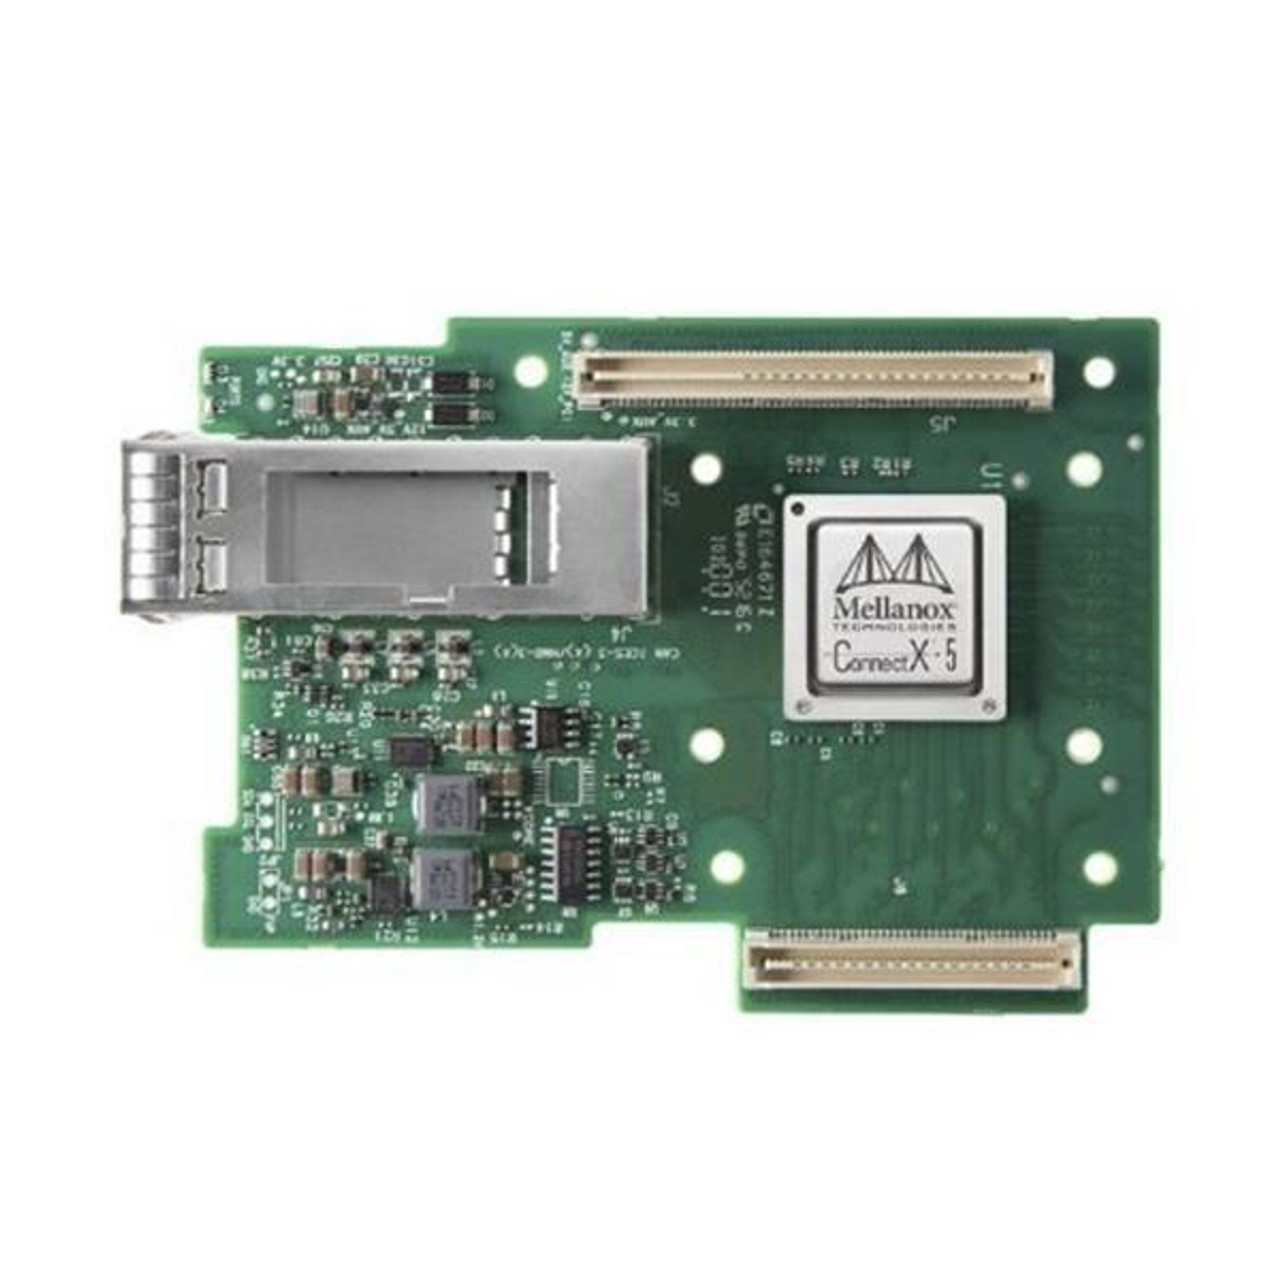 MCX542A-ACAN NVIDIA ConnectX-5 EN Adapter Card for OCP2.0 Type 1 with Host Management 25GbE Dual-Port SFP28 PCIe3.0 x16 No Bracket